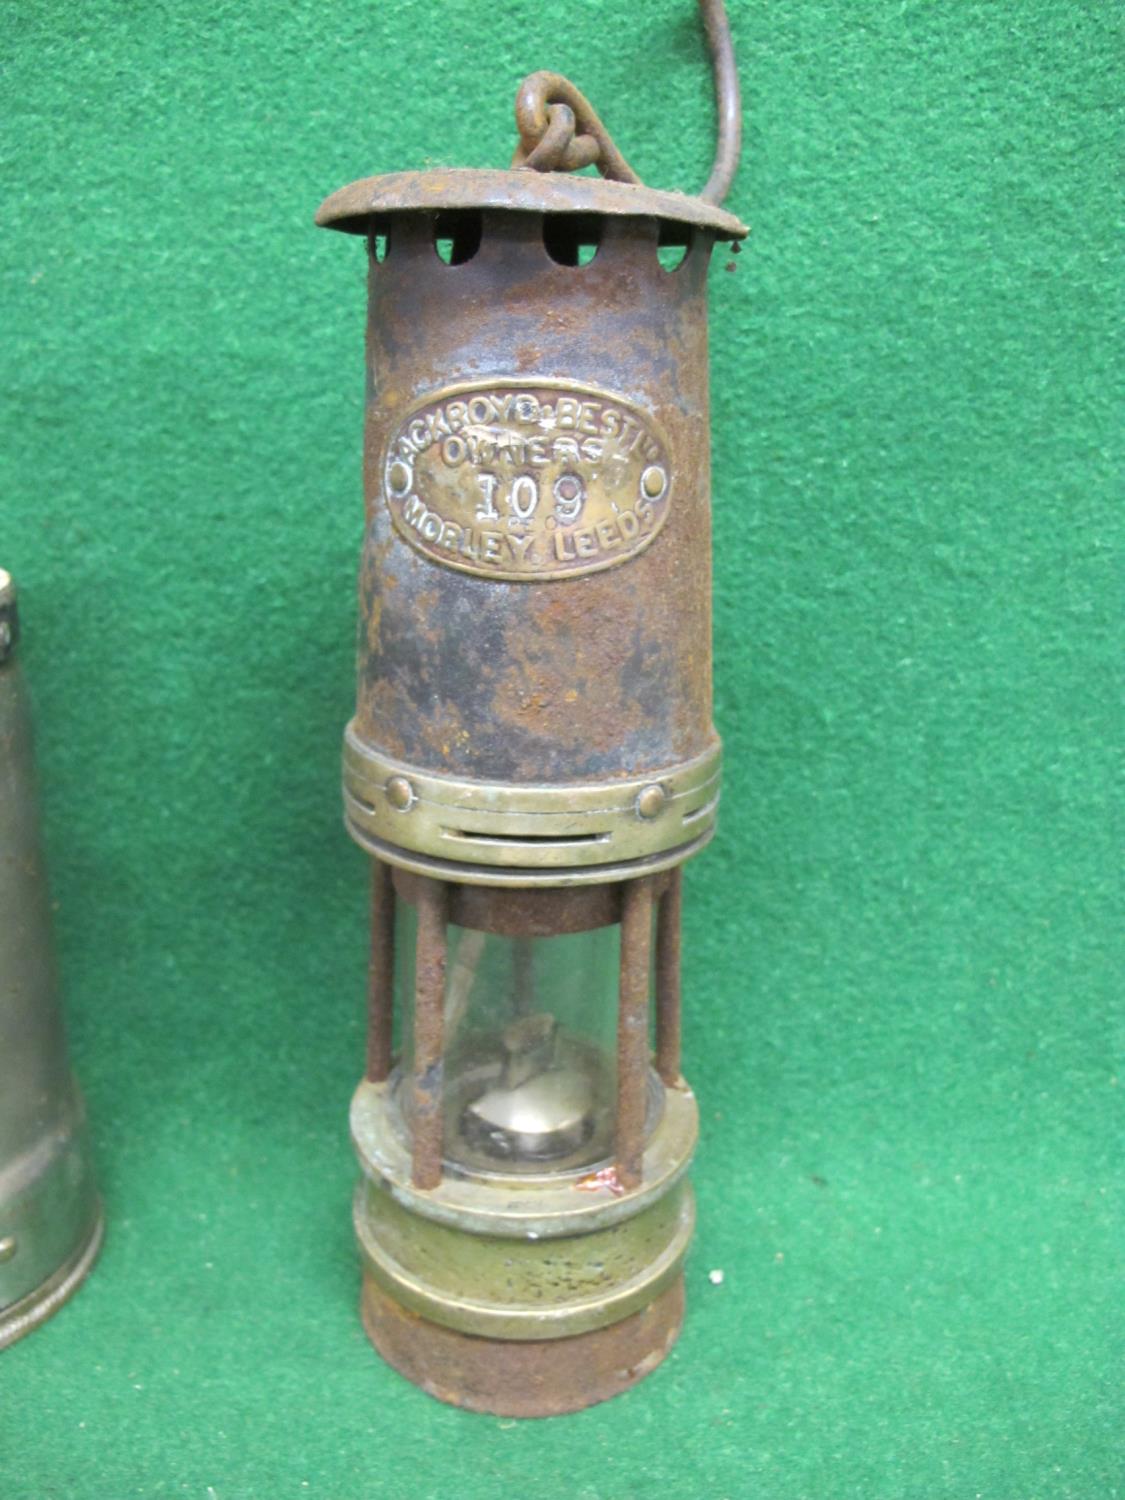 Two miners safety lamps made by Ackroyd Best Ltd, Morley, Leeds and Oldham Type F, both in used - Image 2 of 3